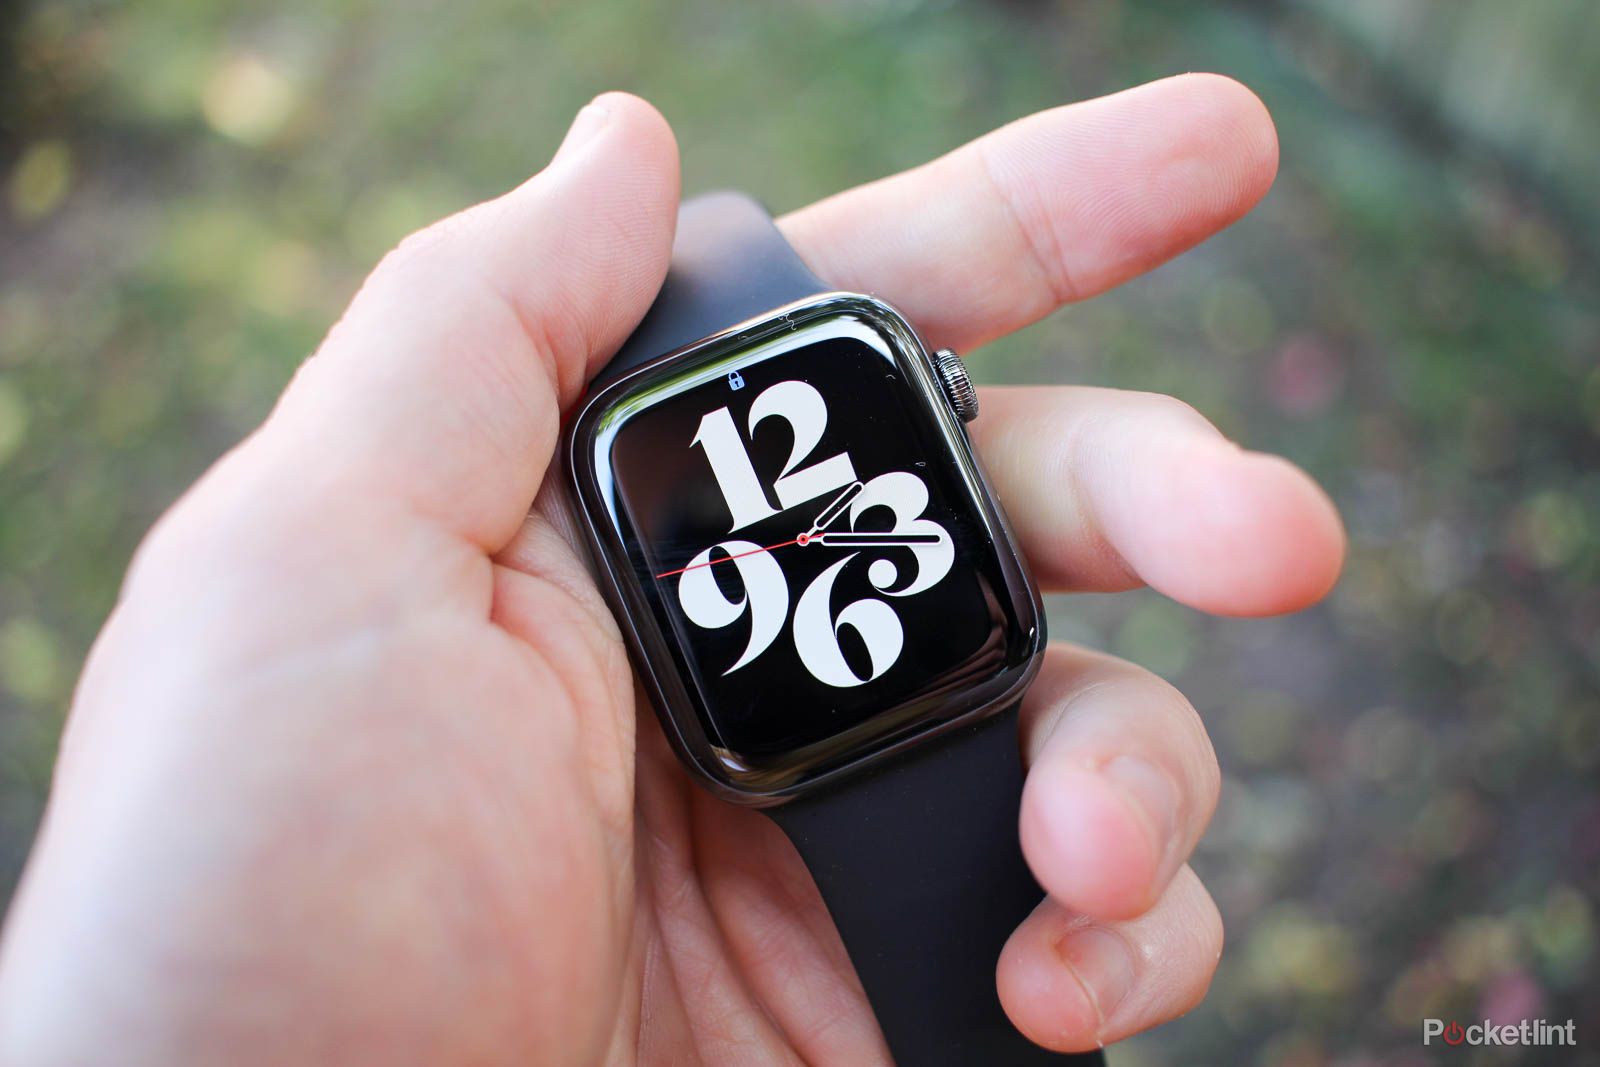 Future Apple Watch could have Wrist ID, patent suggests photo 1